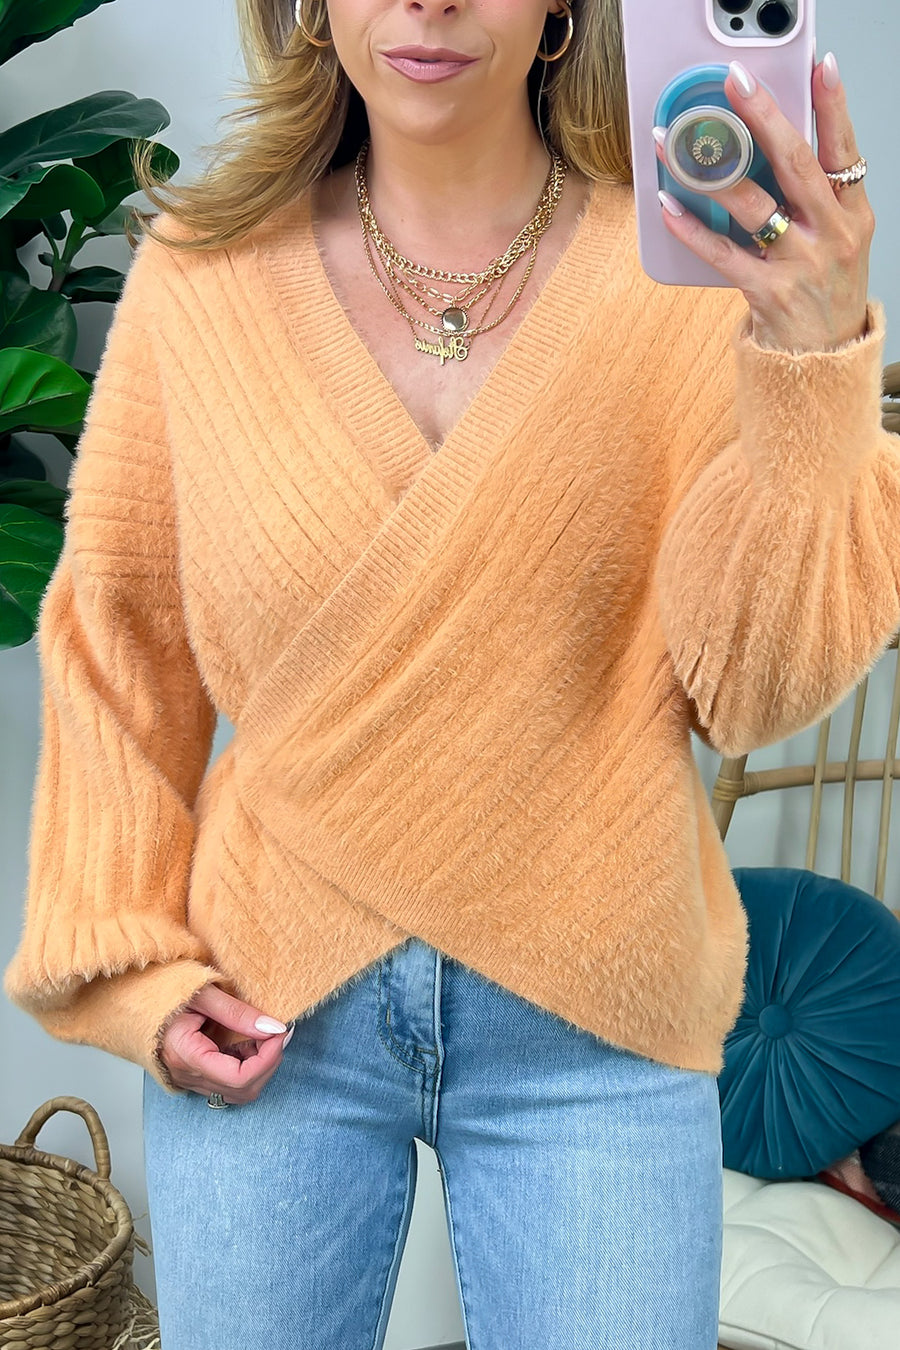  Coletti Ribbed Fuzzy Knit Wrap Sweater - FINAL SALE - Madison and Mallory